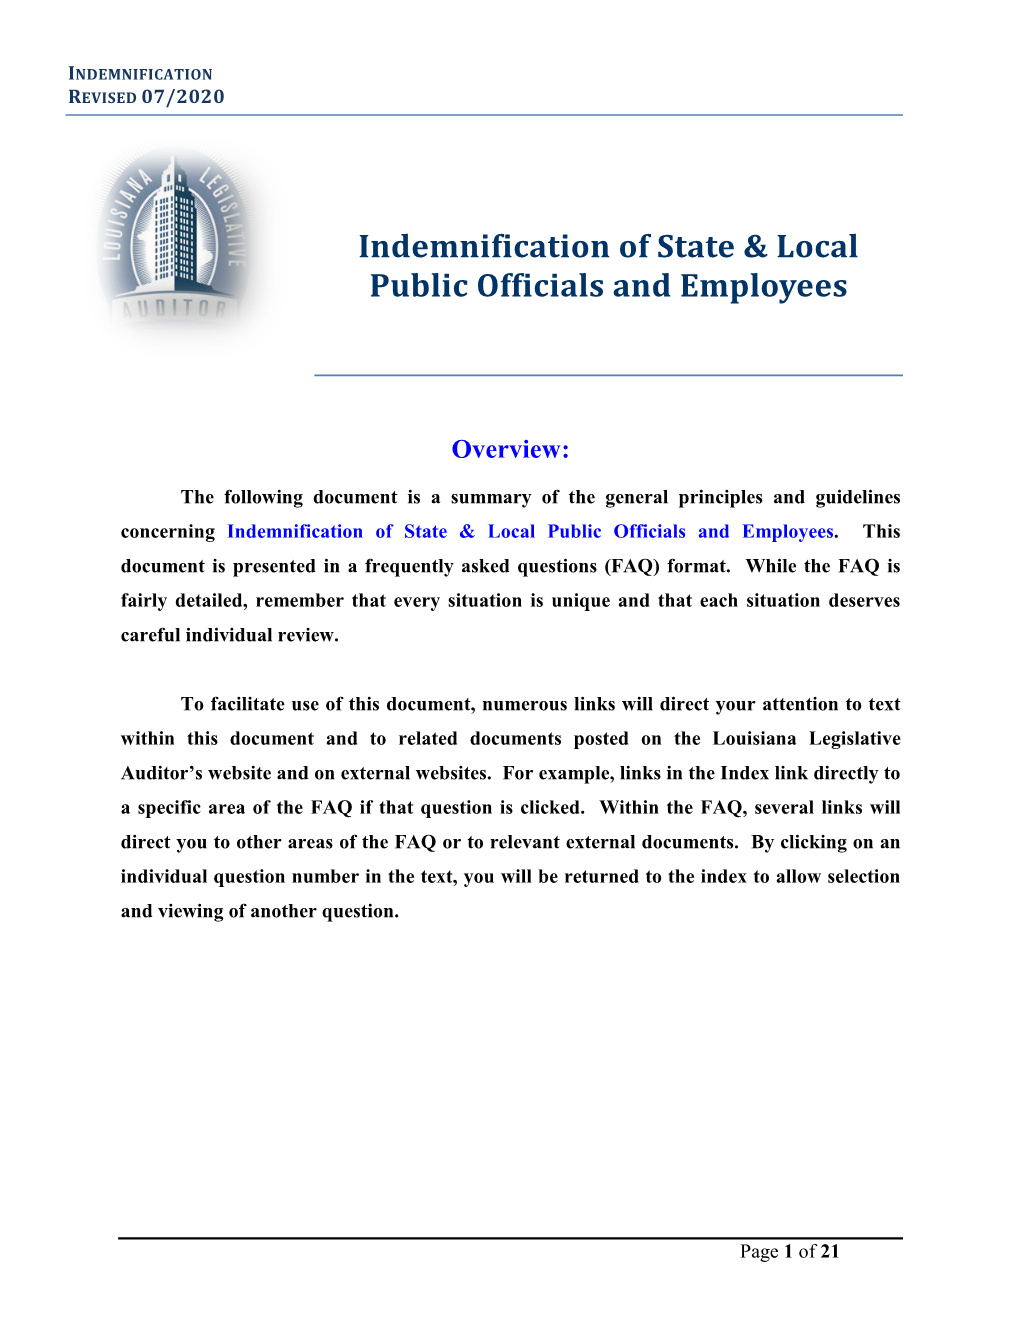 Indemnification of State & Local Public Officials and Employees